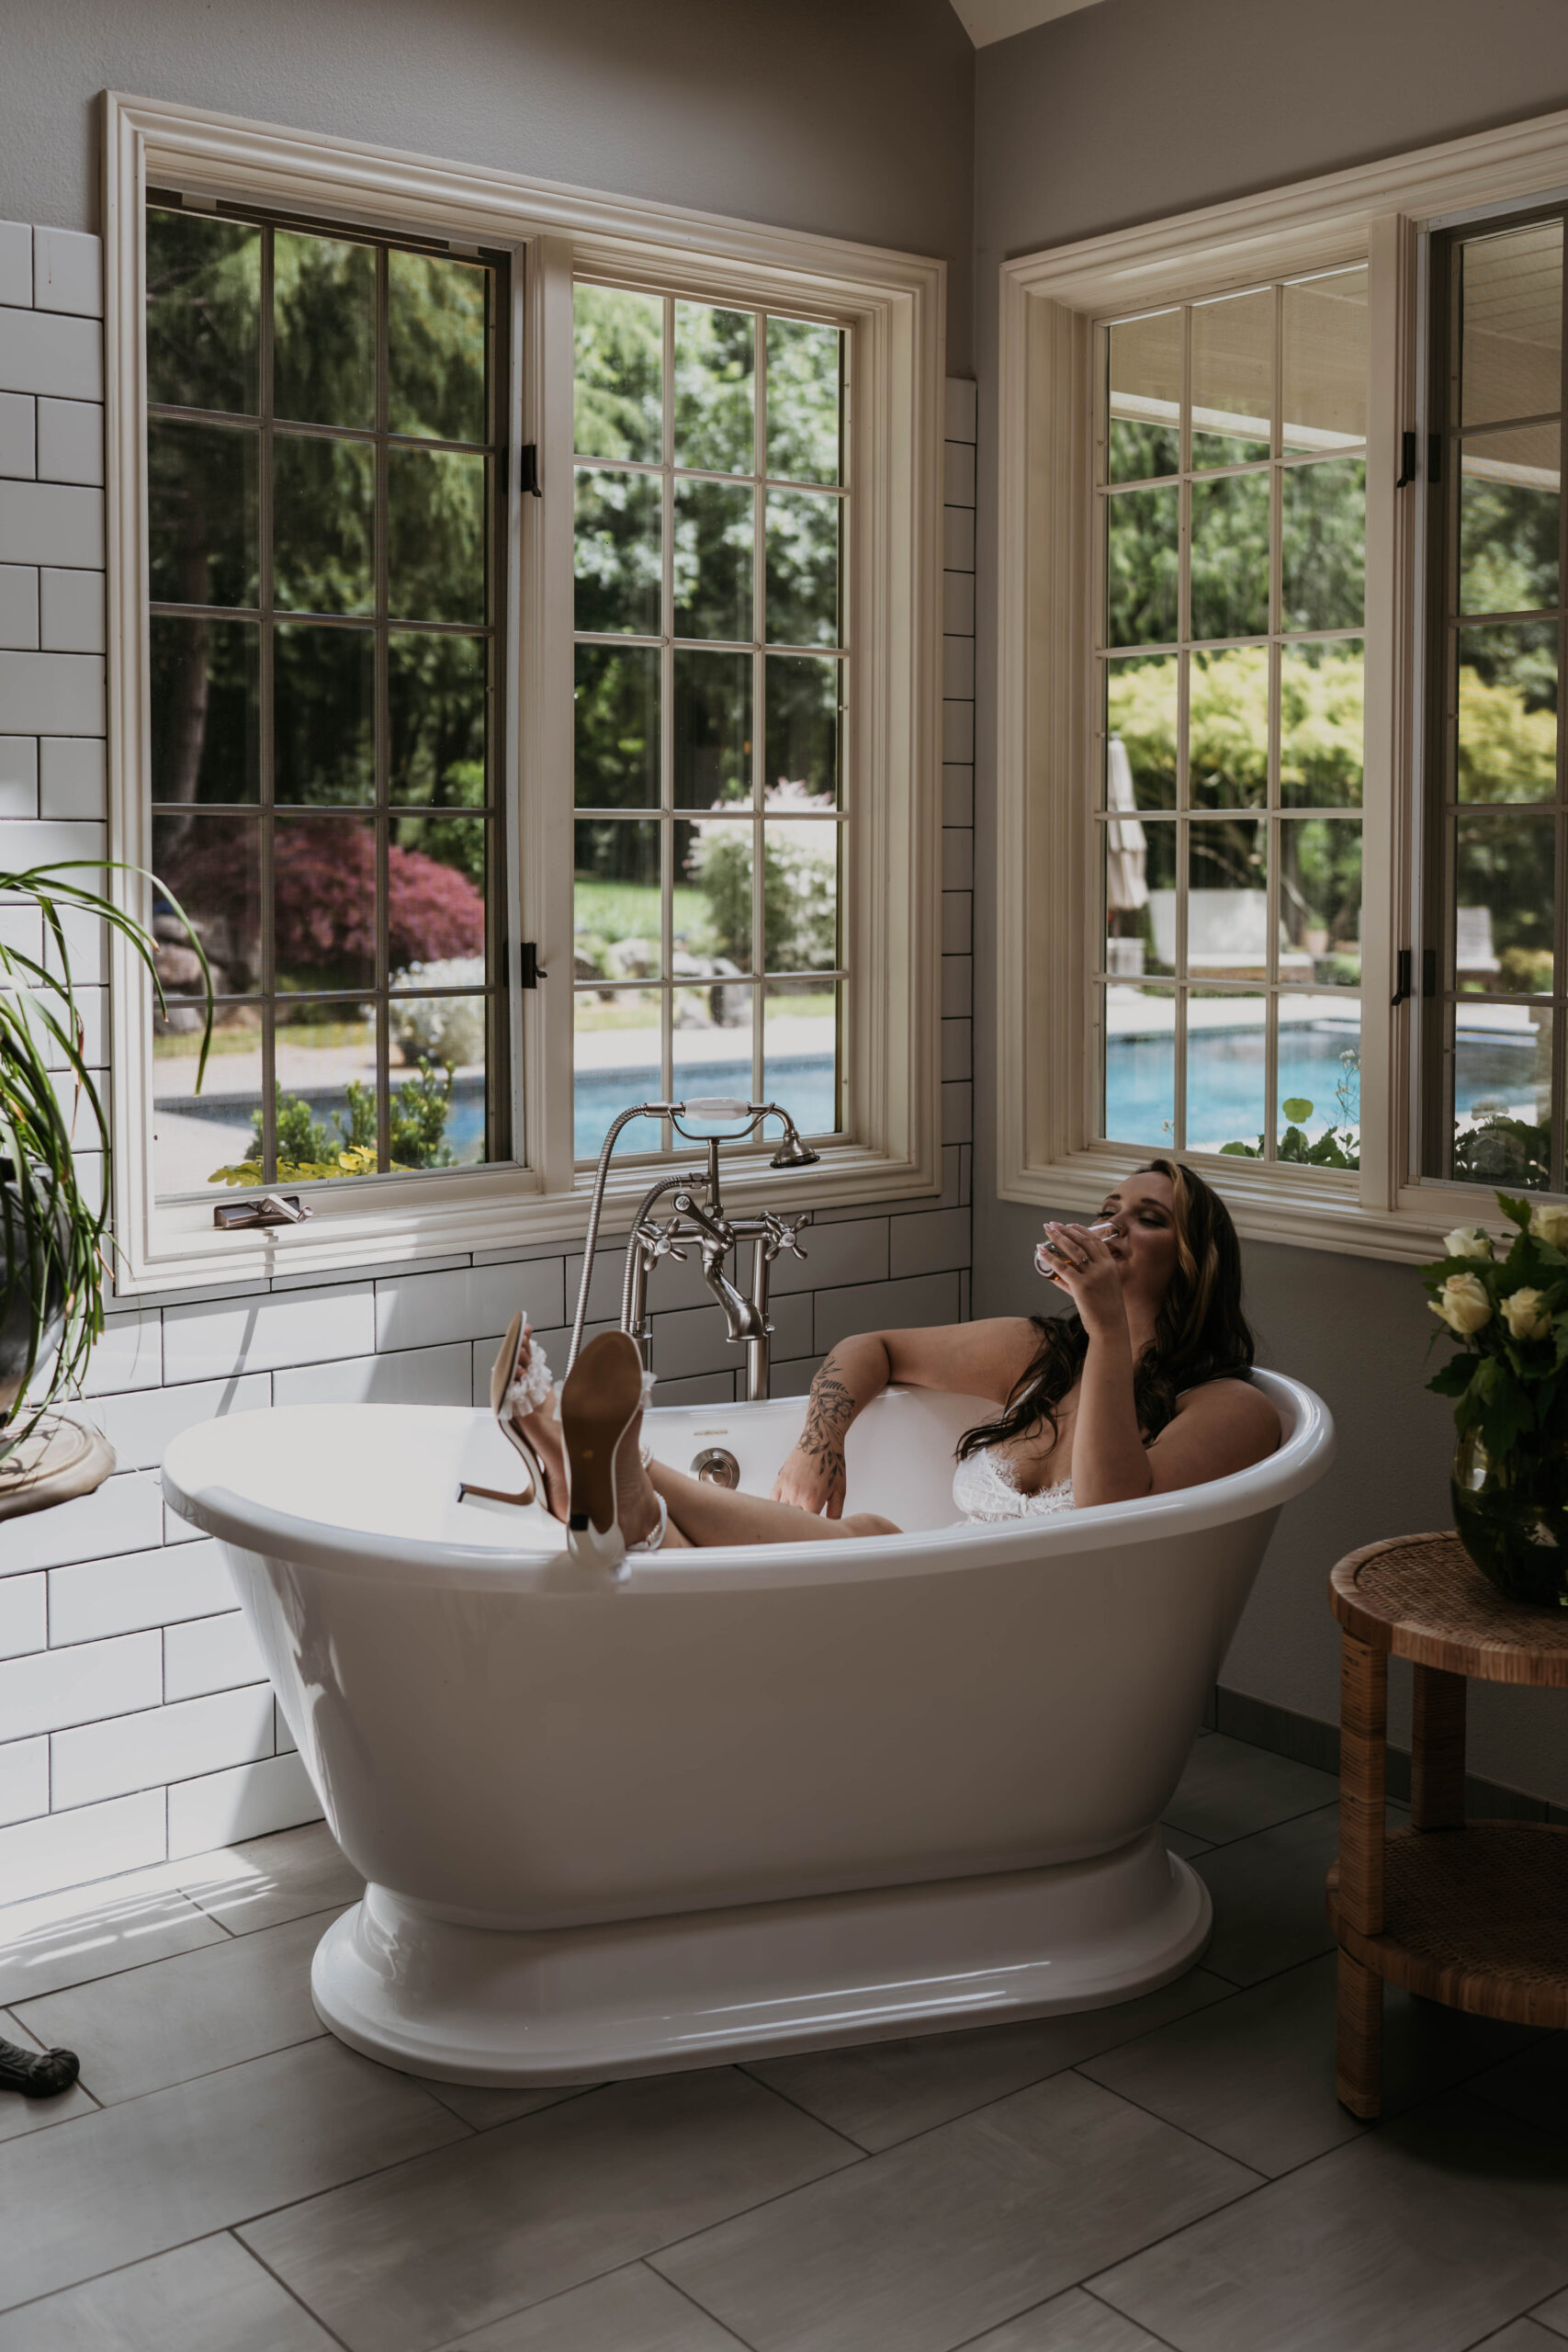 women in big stand alone bath tub in white lingerie playing with hair laughing with big windows behind her